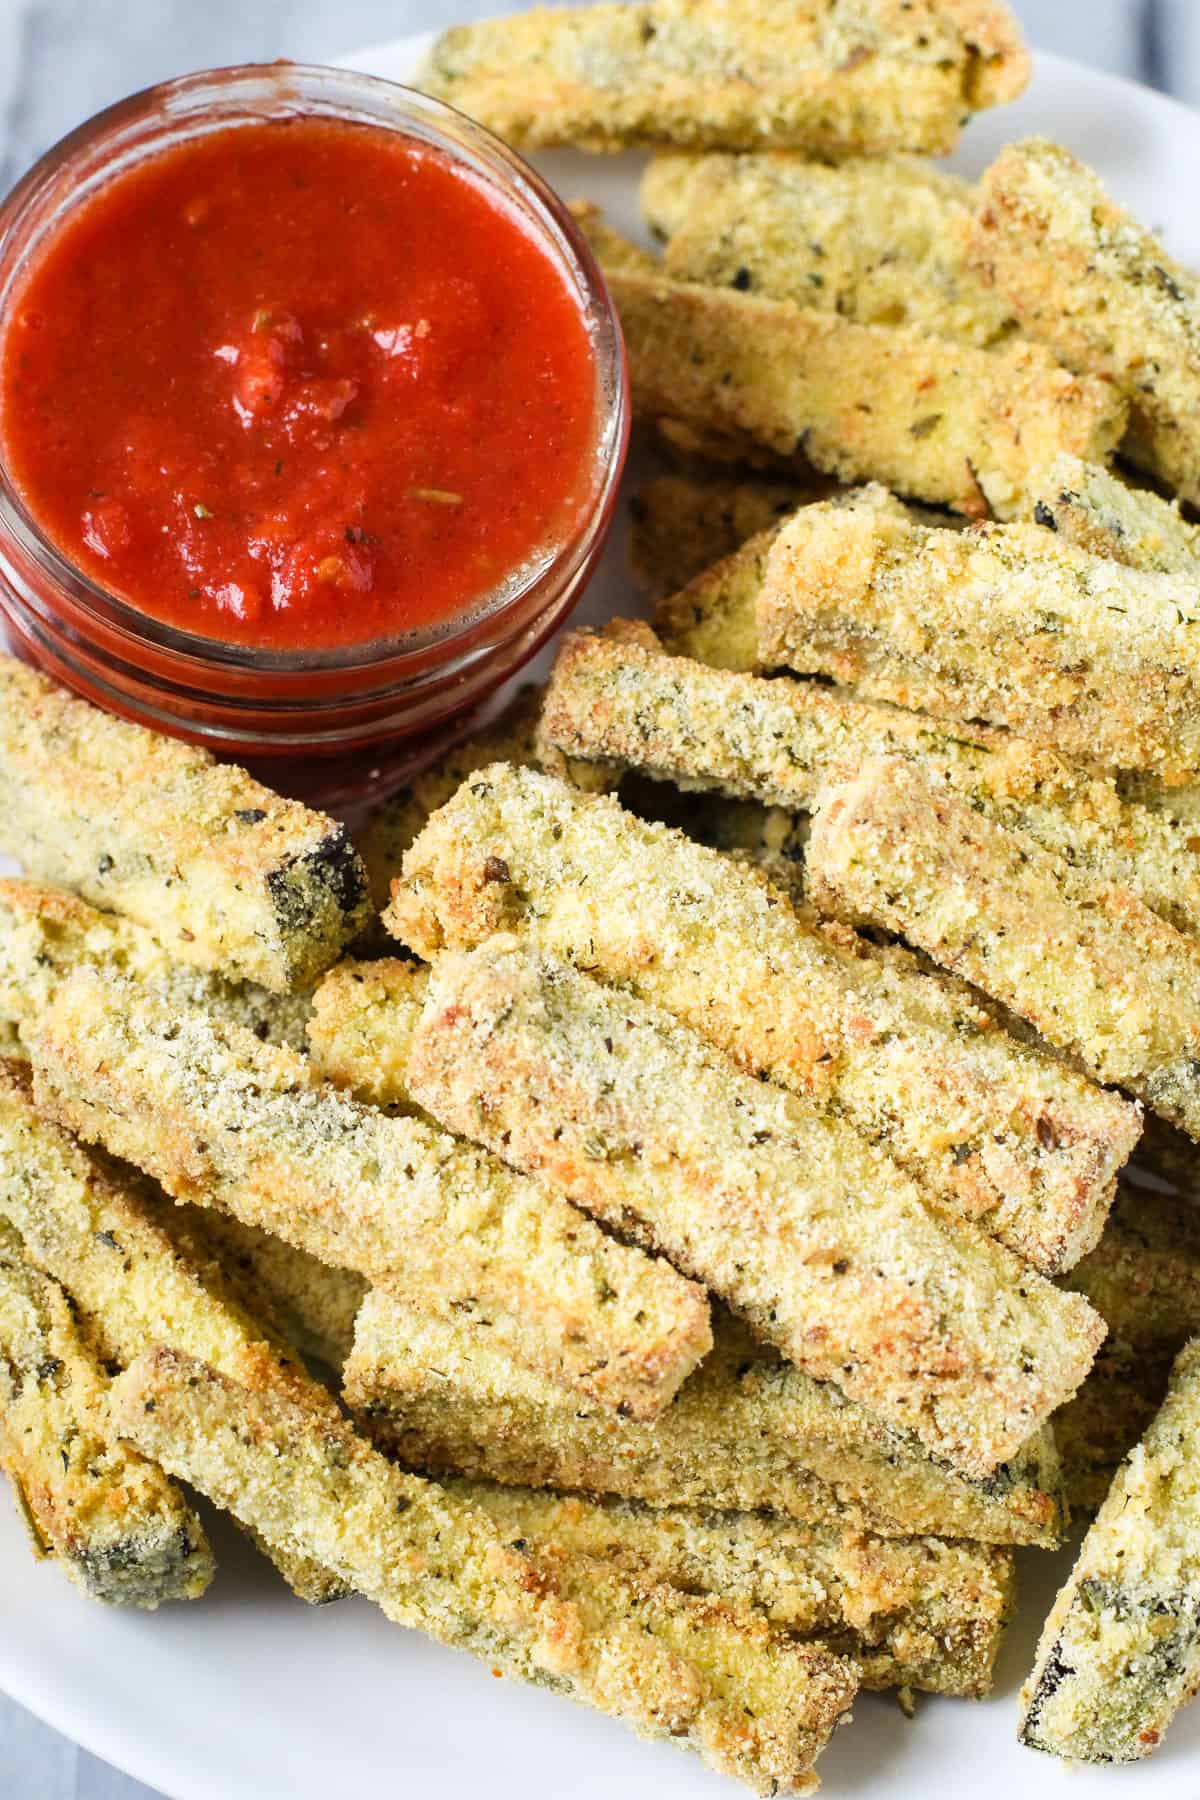 Oven-Baked Eggplant Fries (Low Carb)